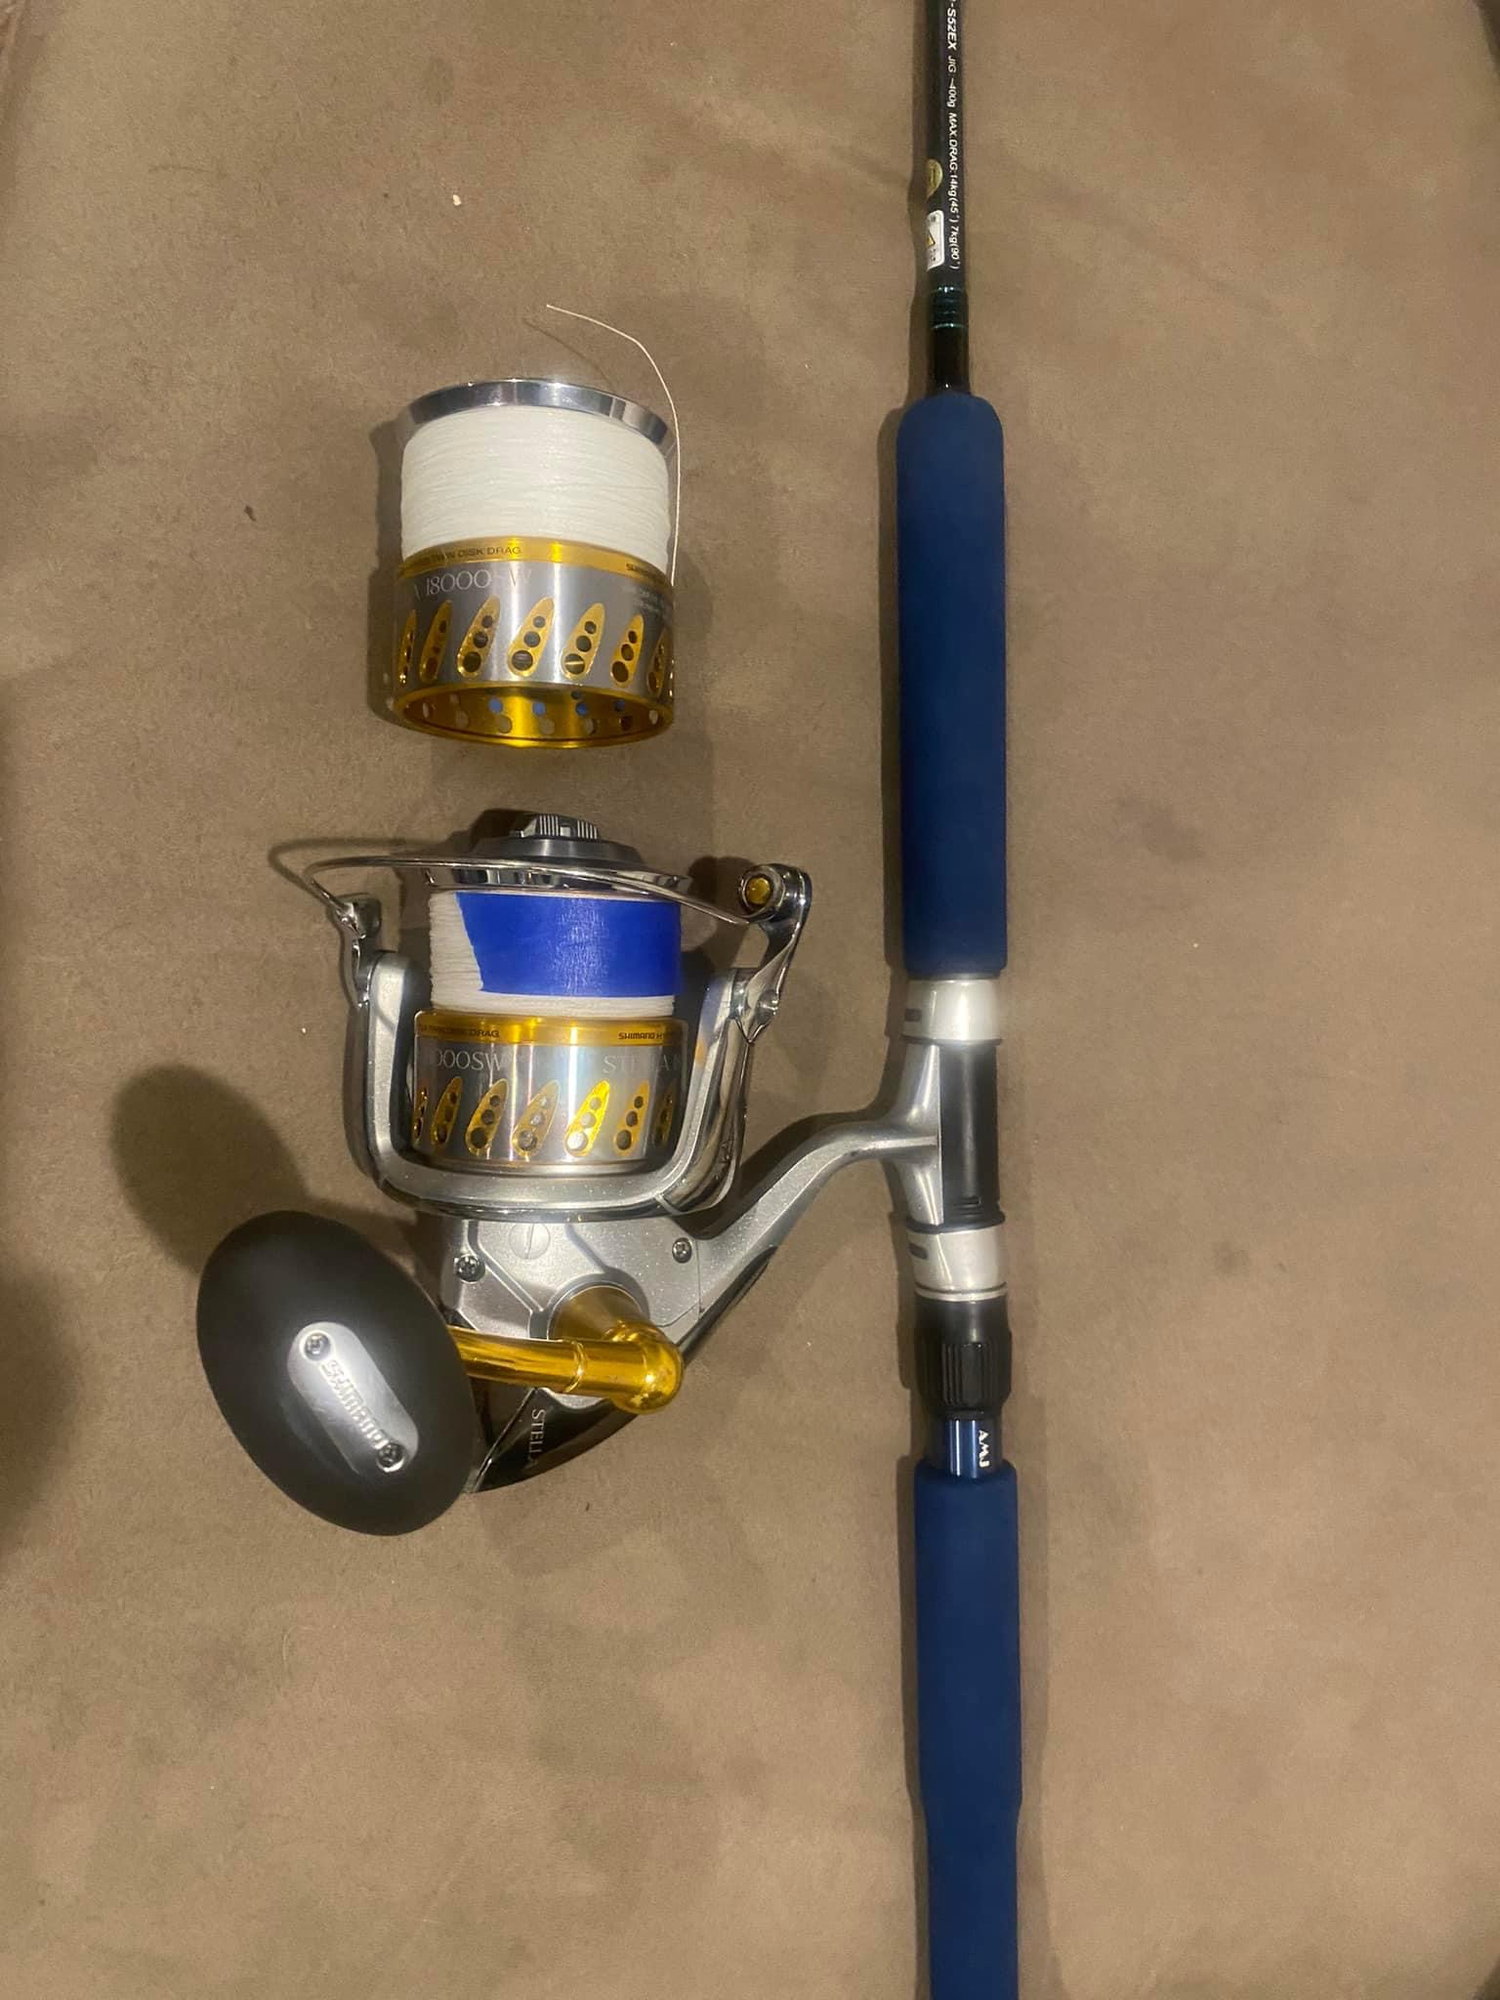 Budget nj tuna popping rod - The Hull Truth - Boating and Fishing Forum